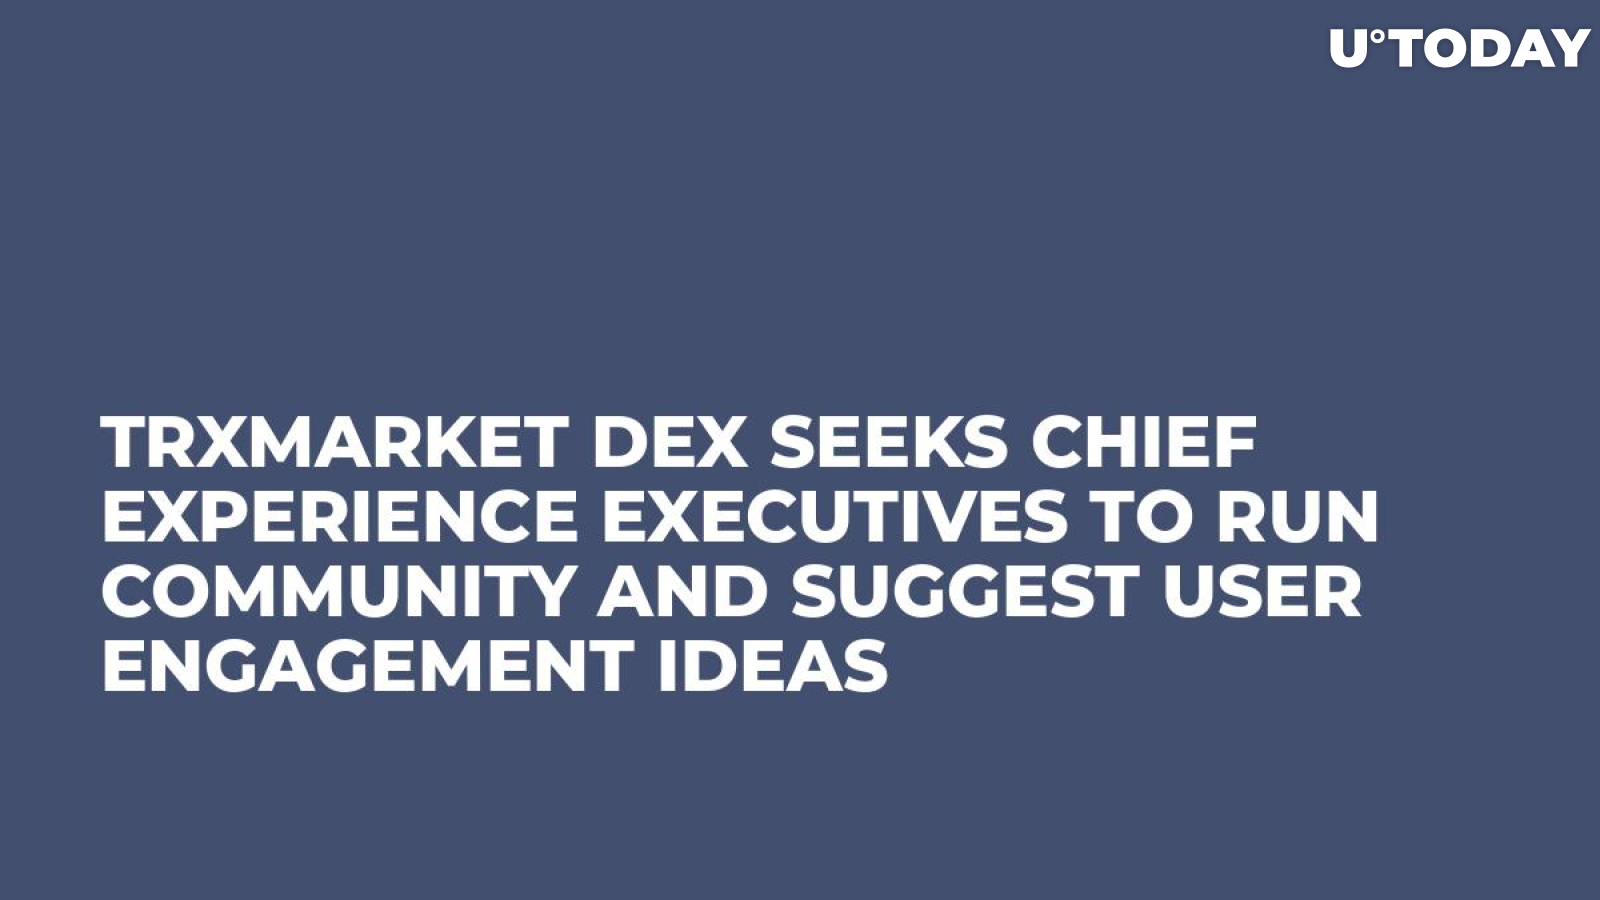 TRXMarket DEX Seeks Chief Experience Executives to Run Community and Suggest User Engagement Ideas